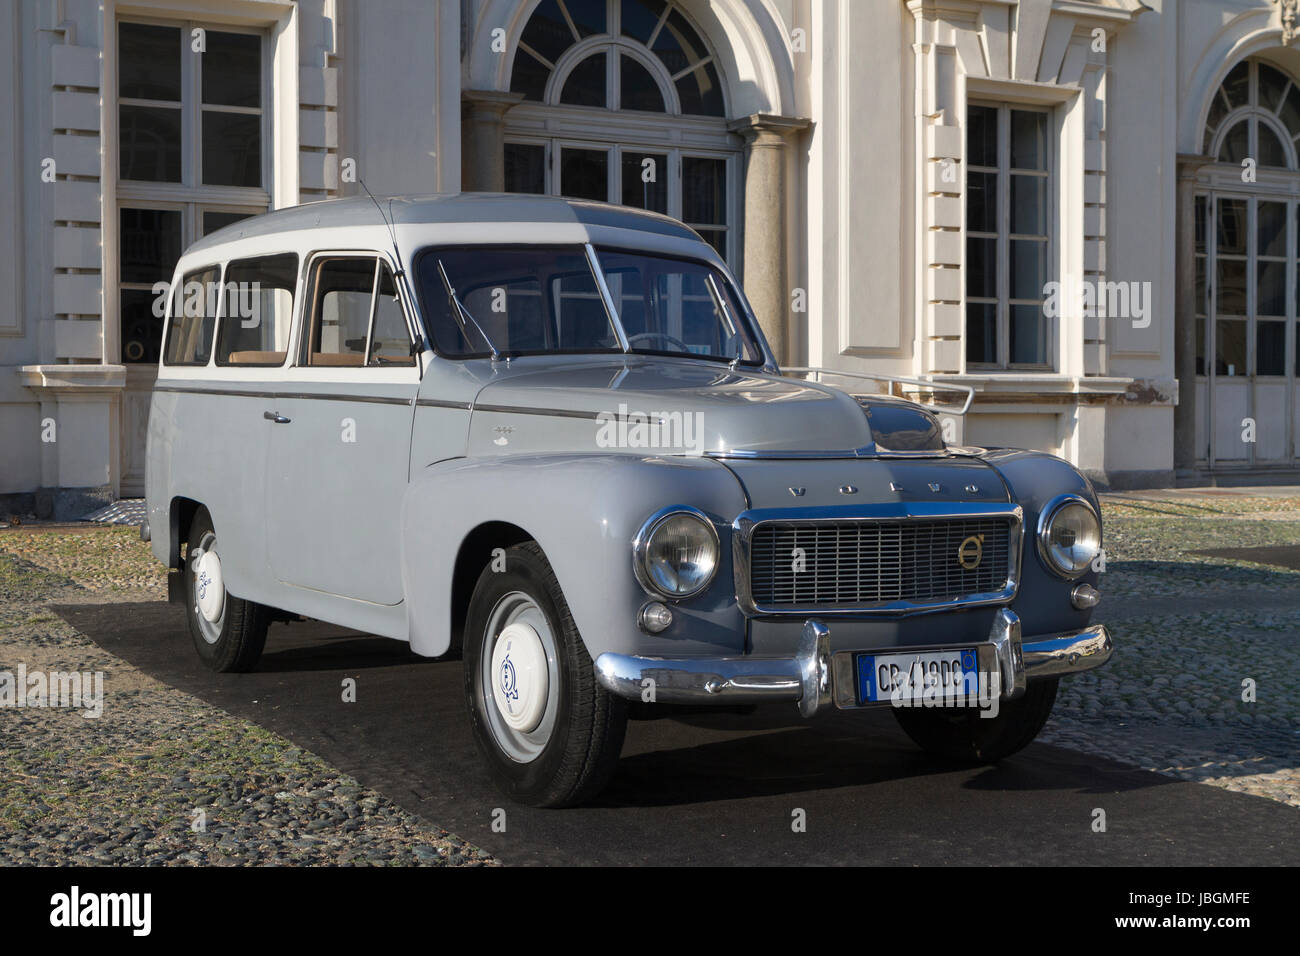 Italy. 10th June, 2017. Volvo celebrates its 90th anniversary with a car exhibition in the court of Valentino Castle during Turin car show. Credit: Marco Destefanis/Pacific Press/Alamy Live News Stock Photo